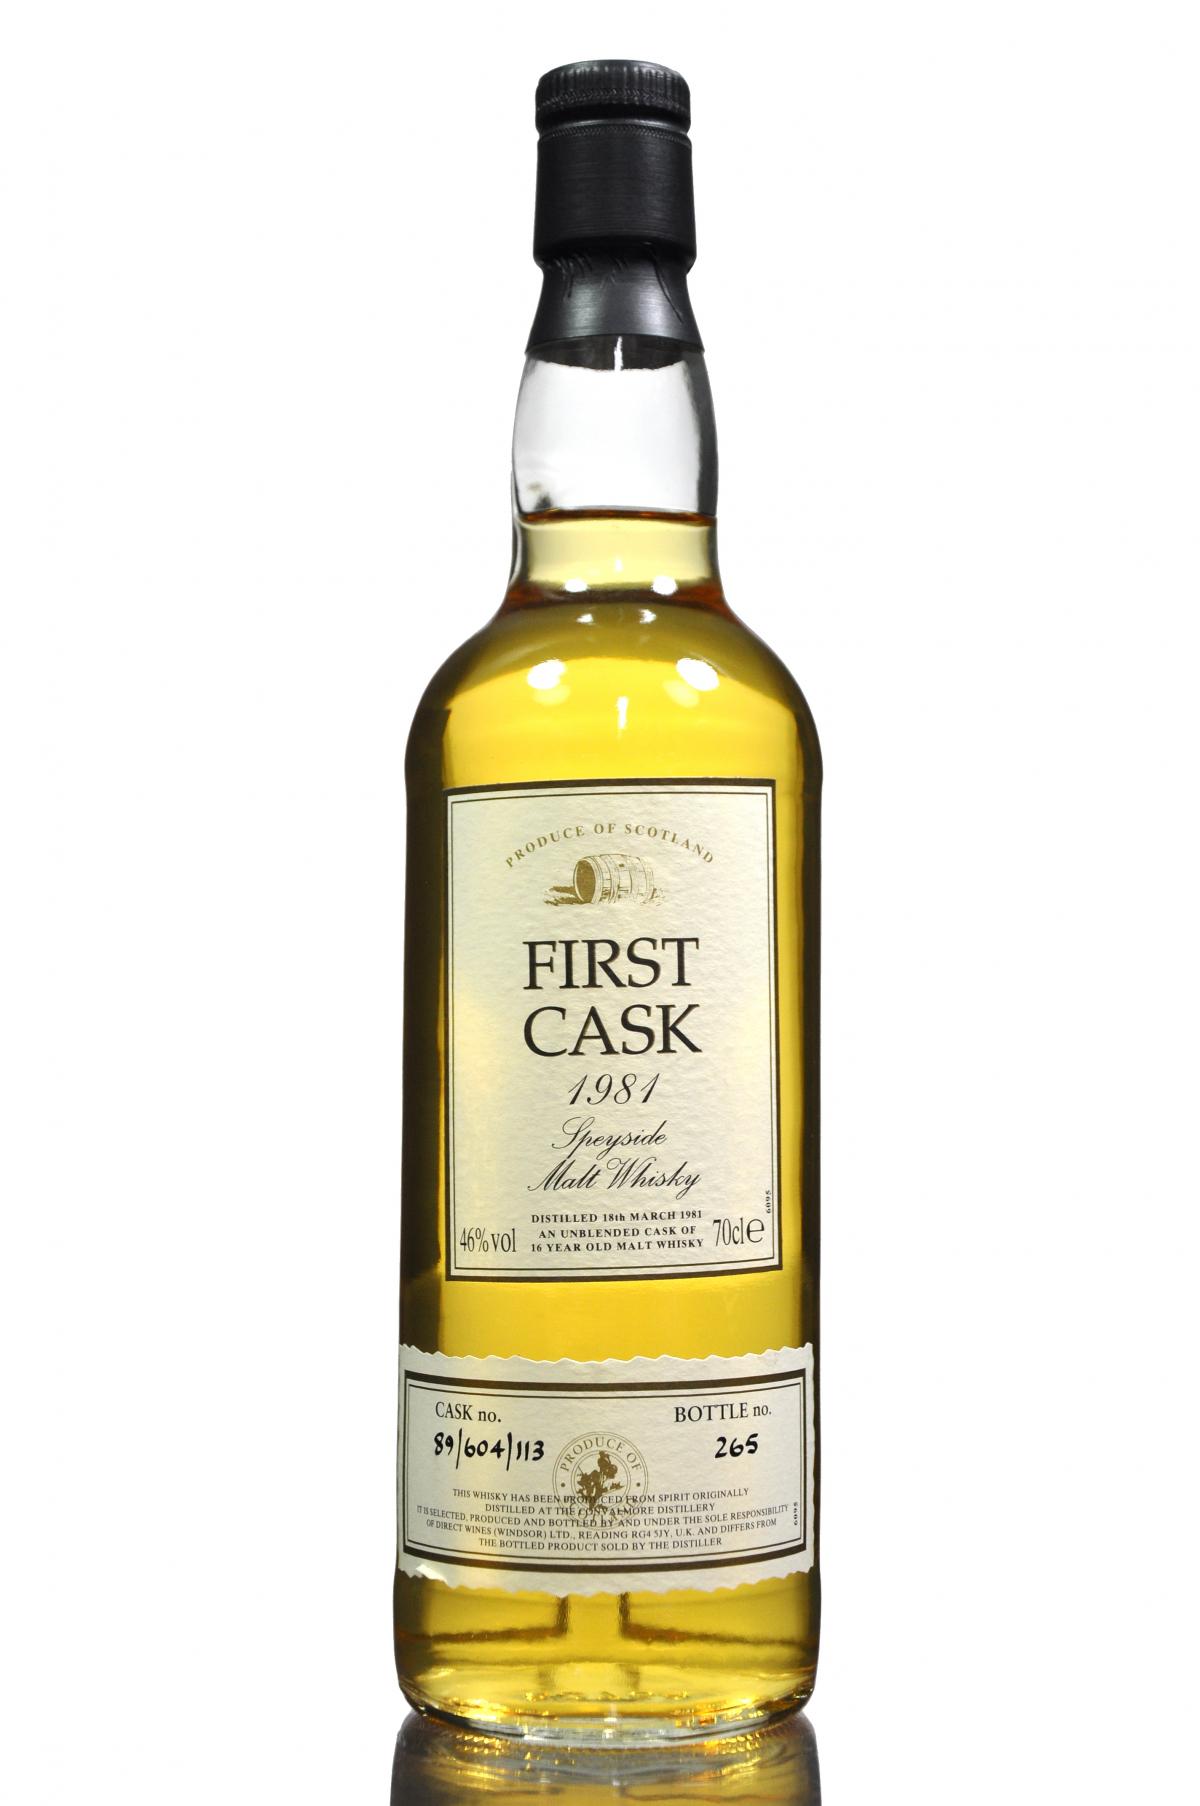 Convalmore 1981 - 16 Year Old - First Cask 89/604/113